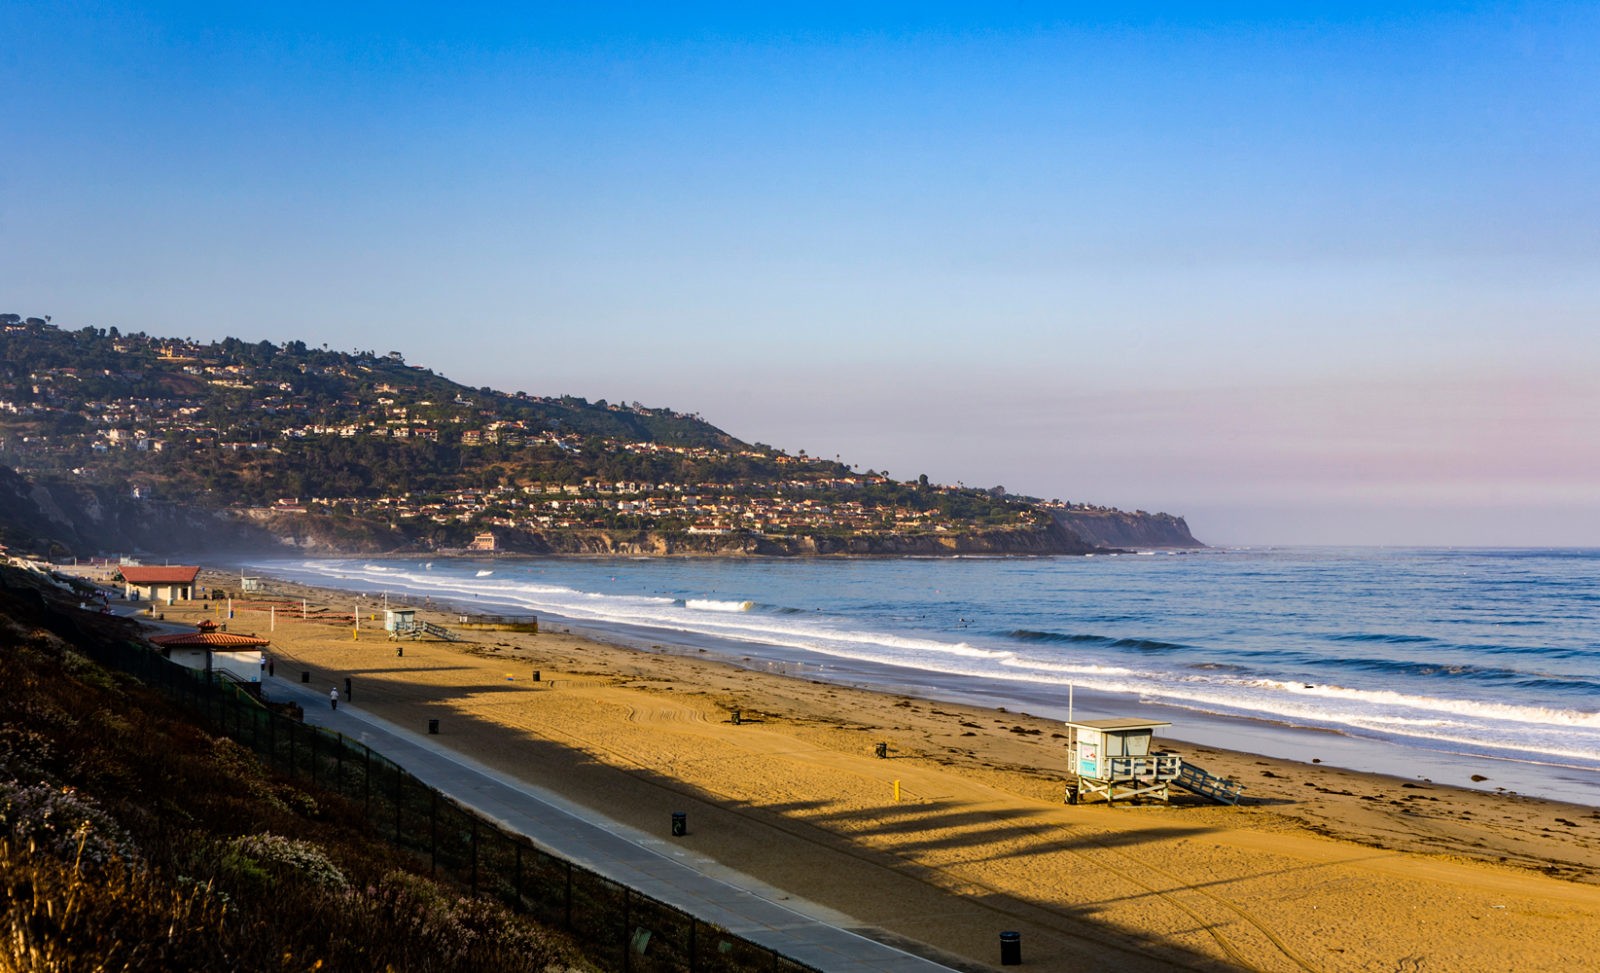 Weekend Trip Ideas - Redondo Beach California - Top 10 Weekend Trip Ideas from Los Angeles featured by popularLos Angeles travel blogger, My Beauty Bunny